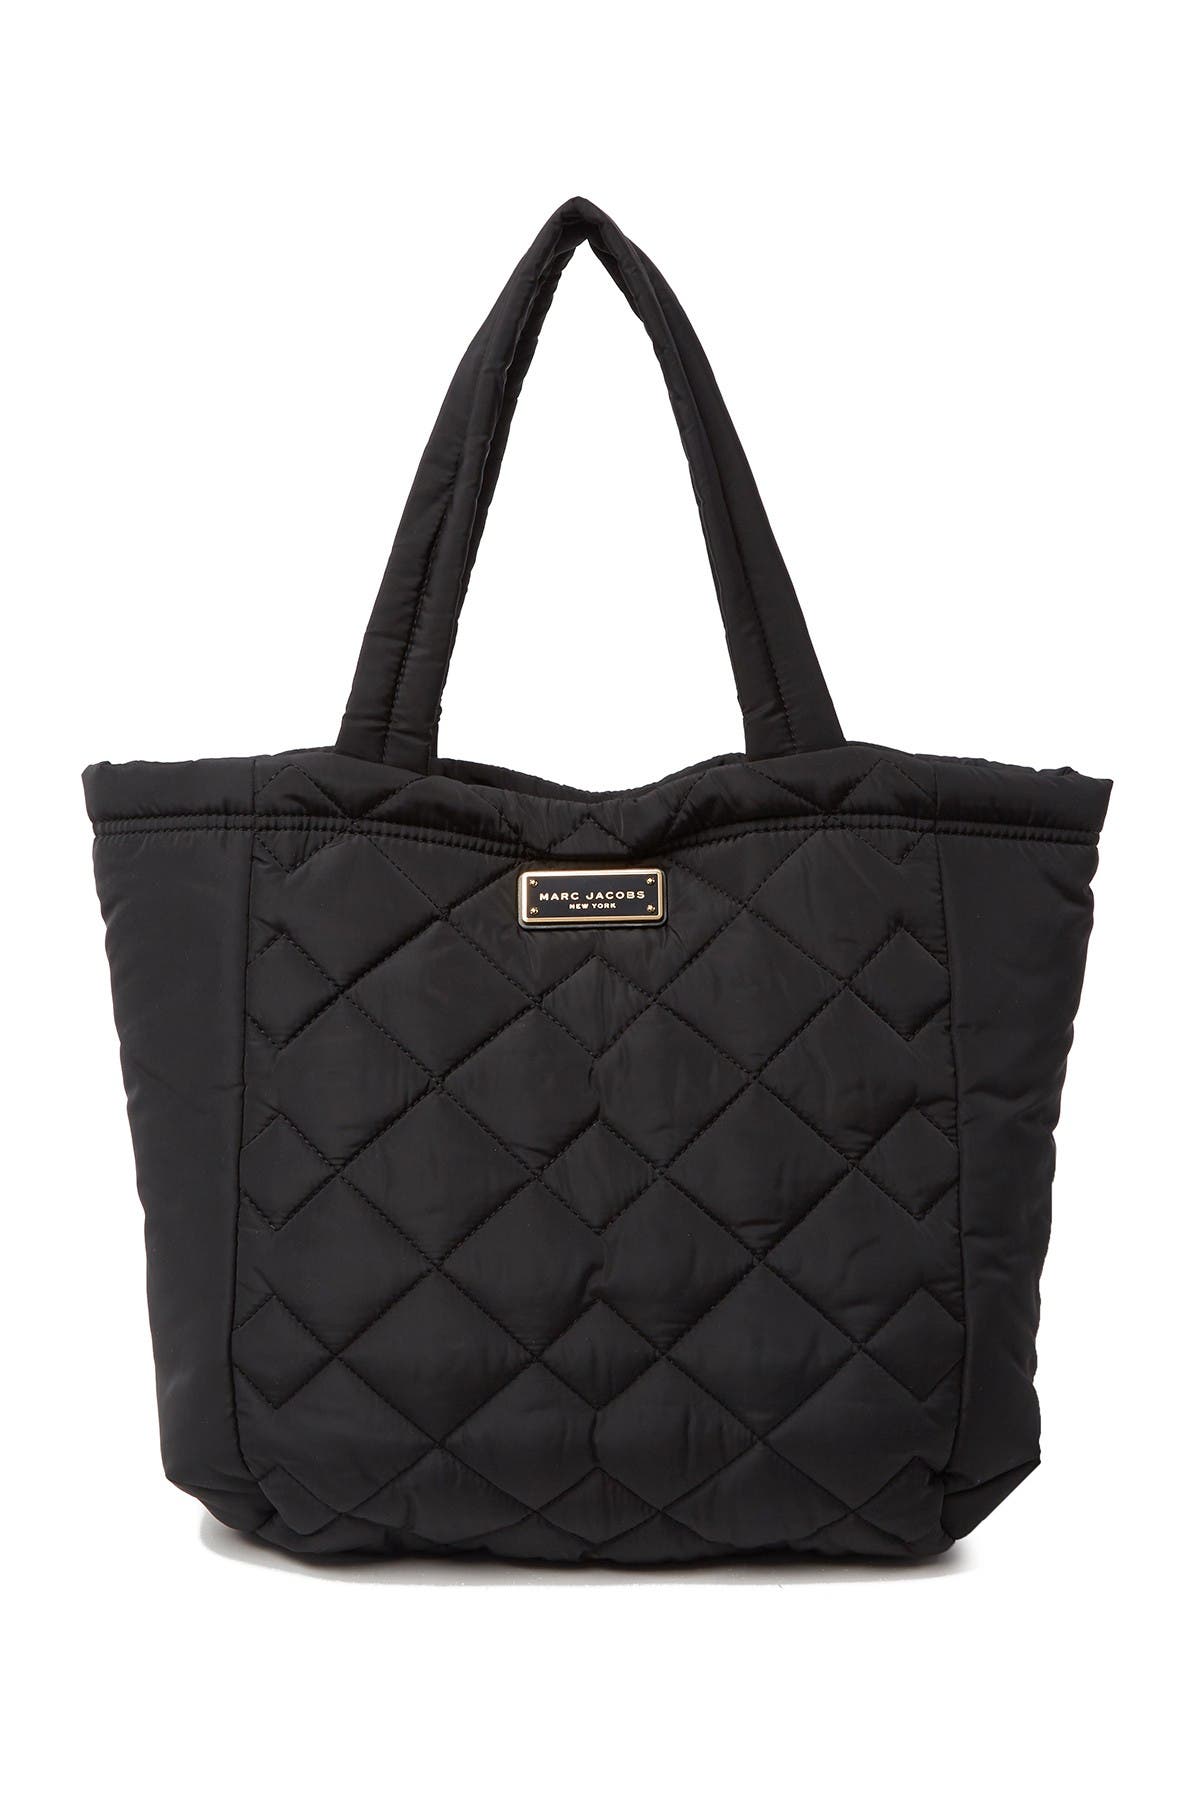 Marc Jacobs | Quilted Nylon Tote 